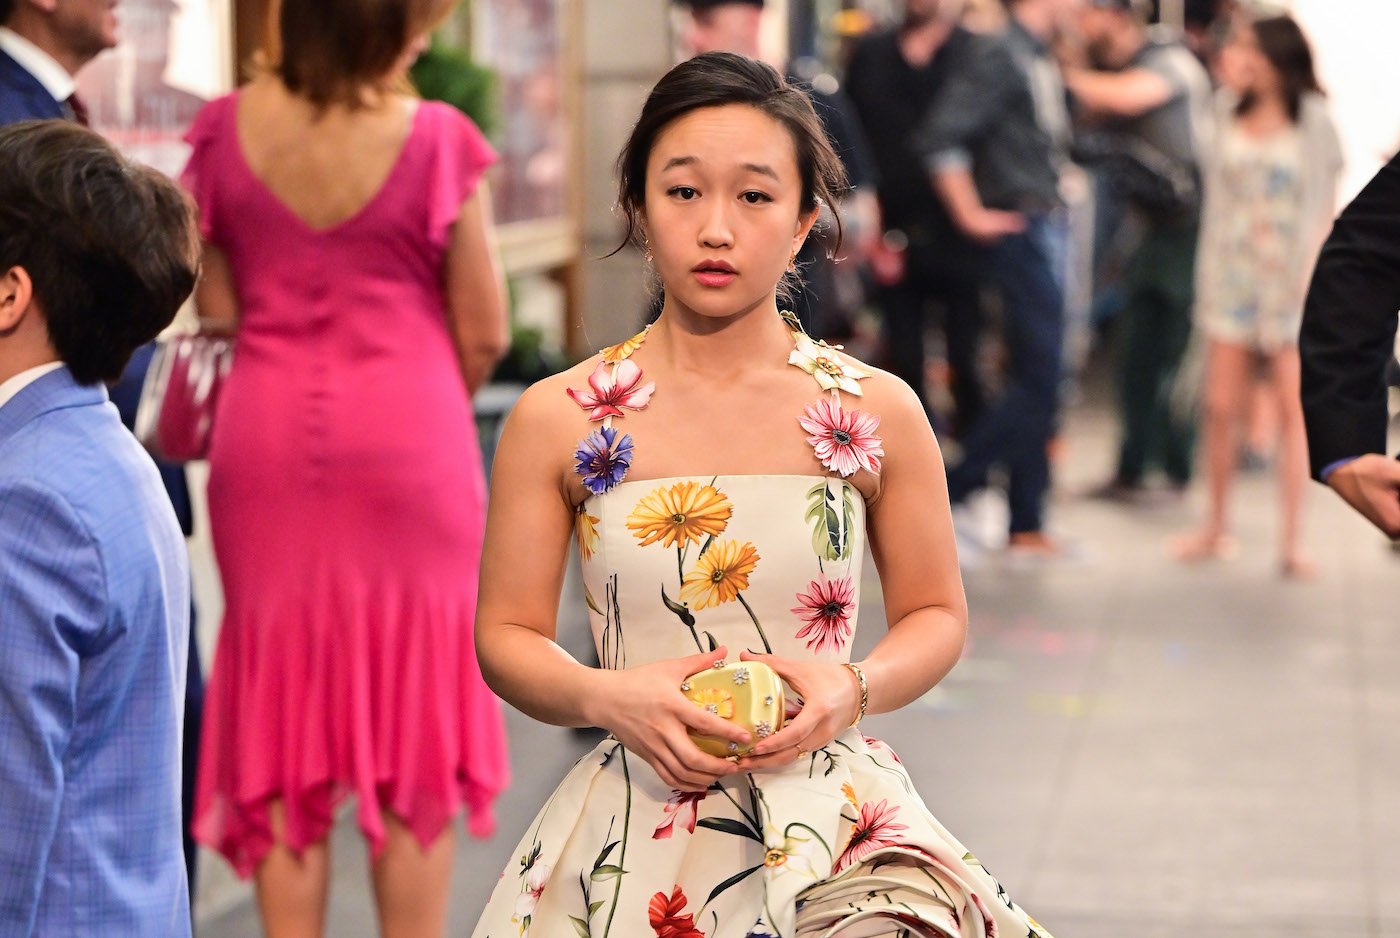 Cathy Ang on the set of 'And Just Like That...,' the follow-up series to 'Sex and the City,' in July 2021 in New York City